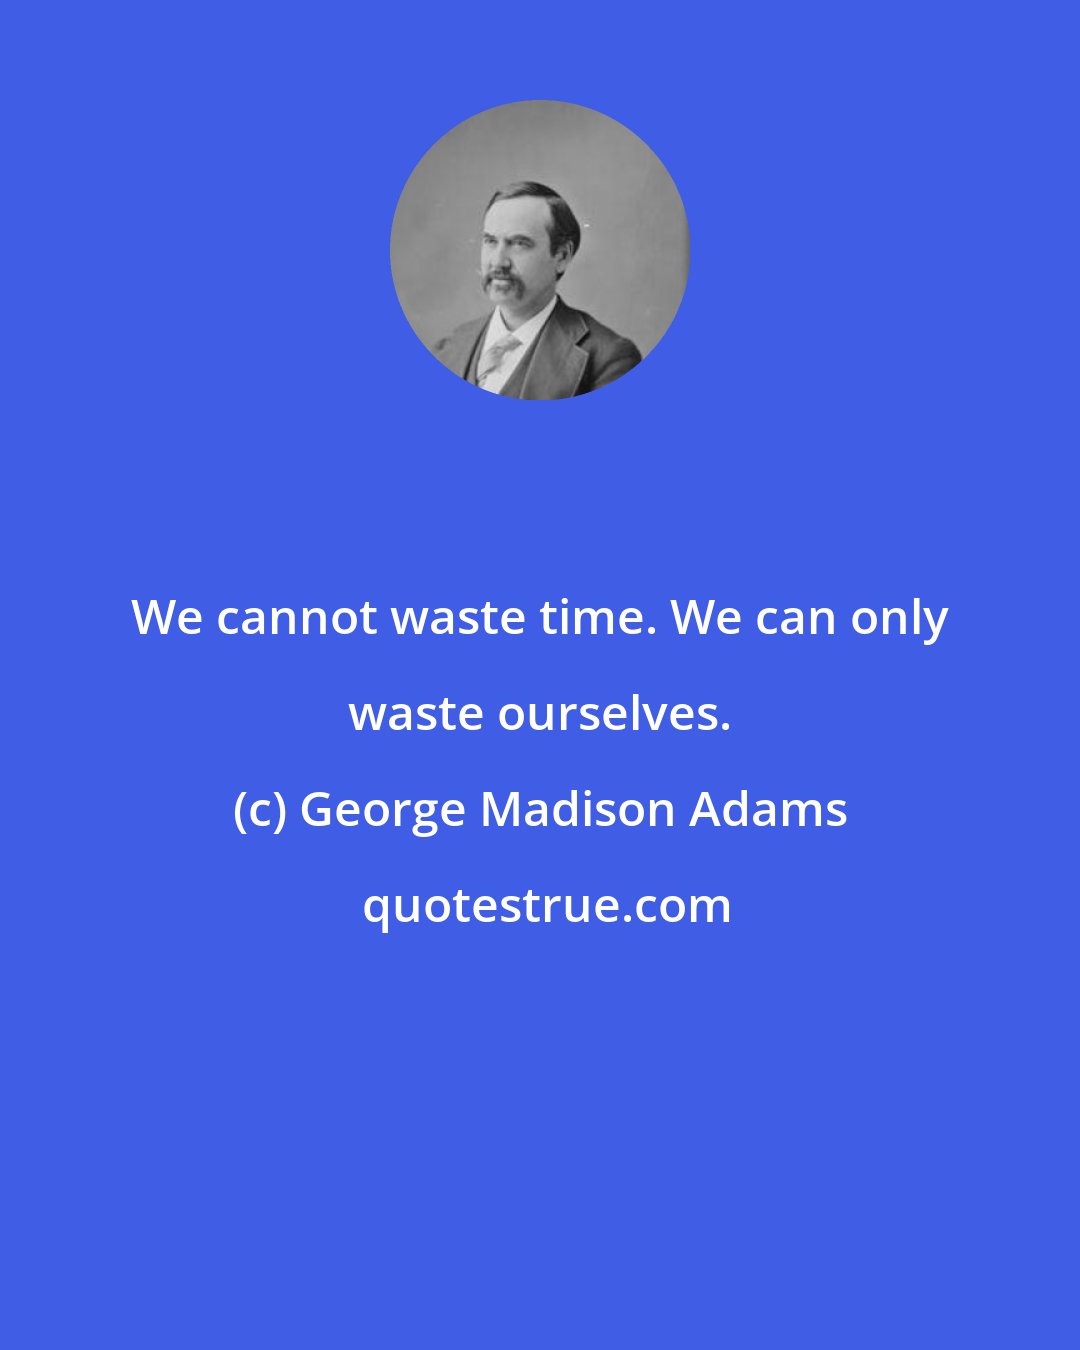 George Madison Adams: We cannot waste time. We can only waste ourselves.